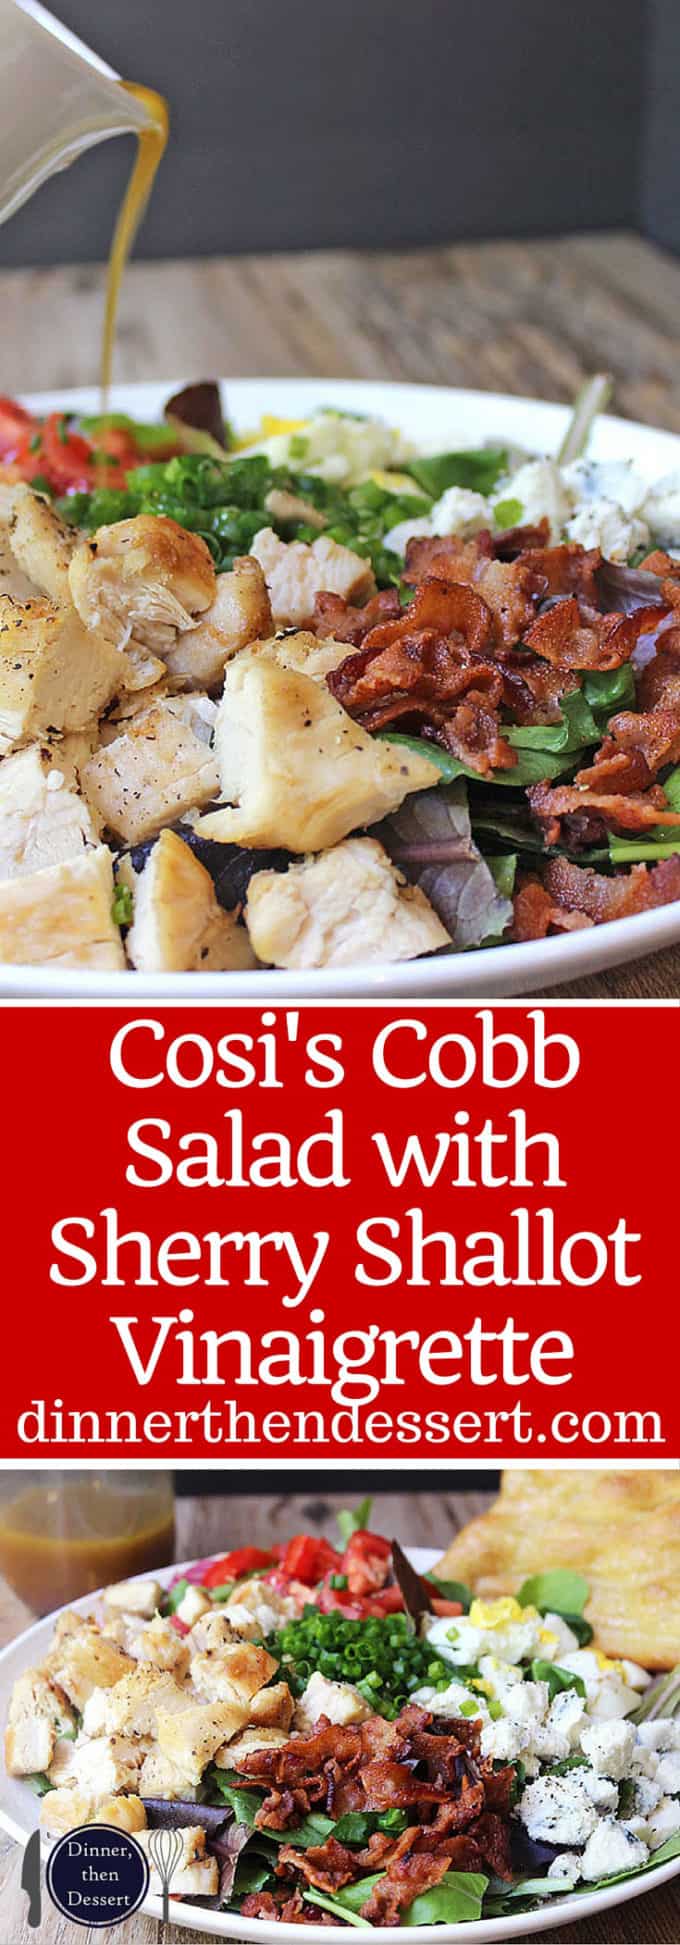 Cosi Cobb Salad with grilled chicken, bacon, eggs, gorgonzola and more topped with Cosi's signature Sherry Shallot Vinaigrette dressing.